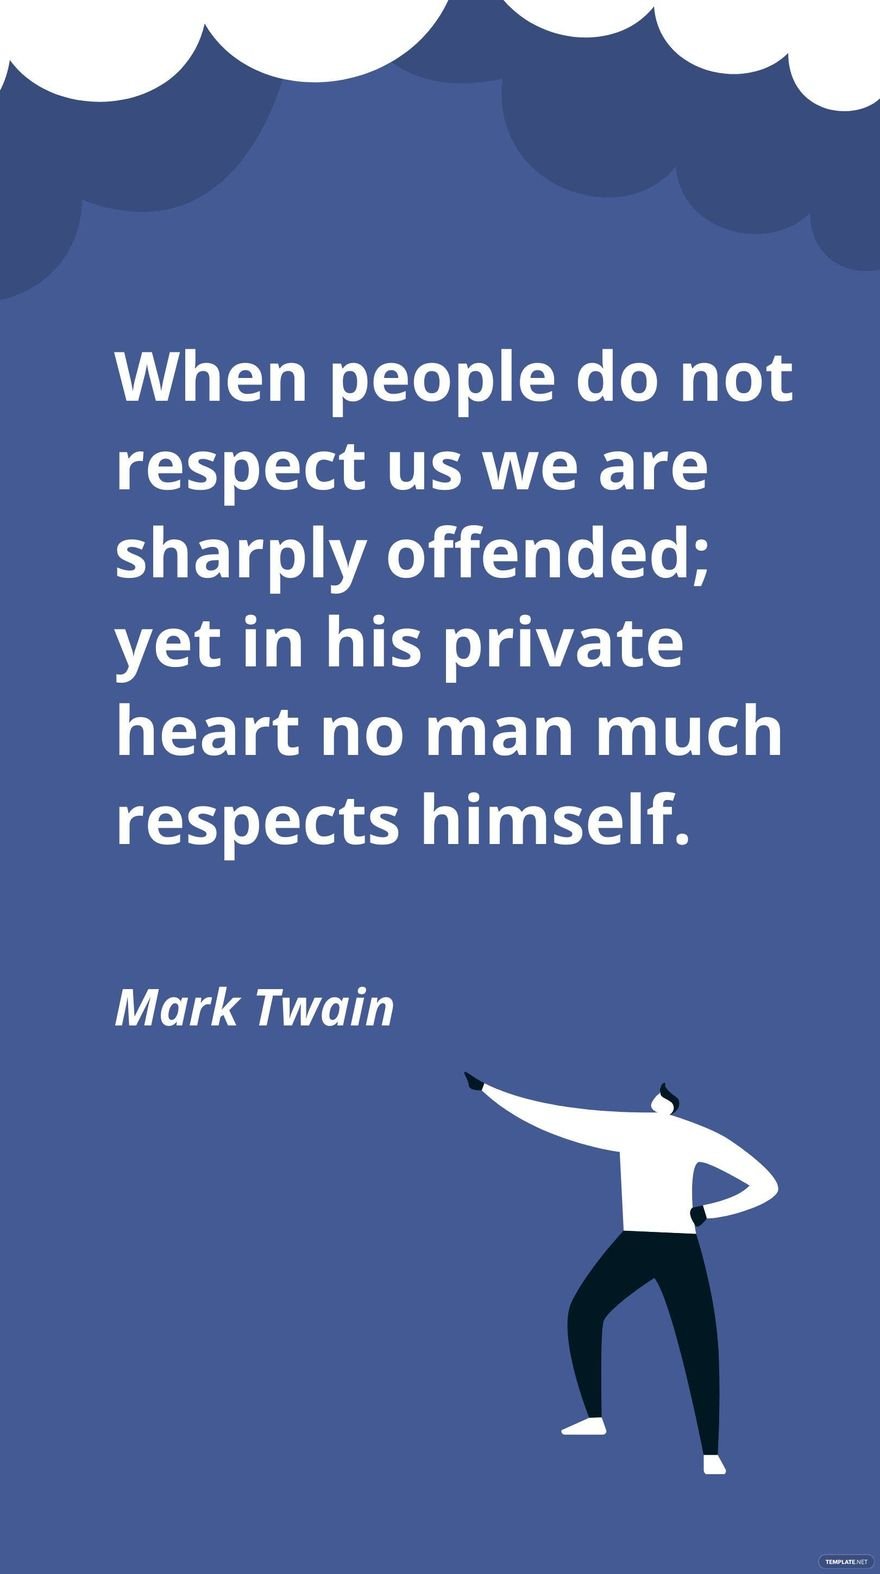 Mark Twain - When people do not respect us we are sharply offended; yet in his private heart no man much respects himself.